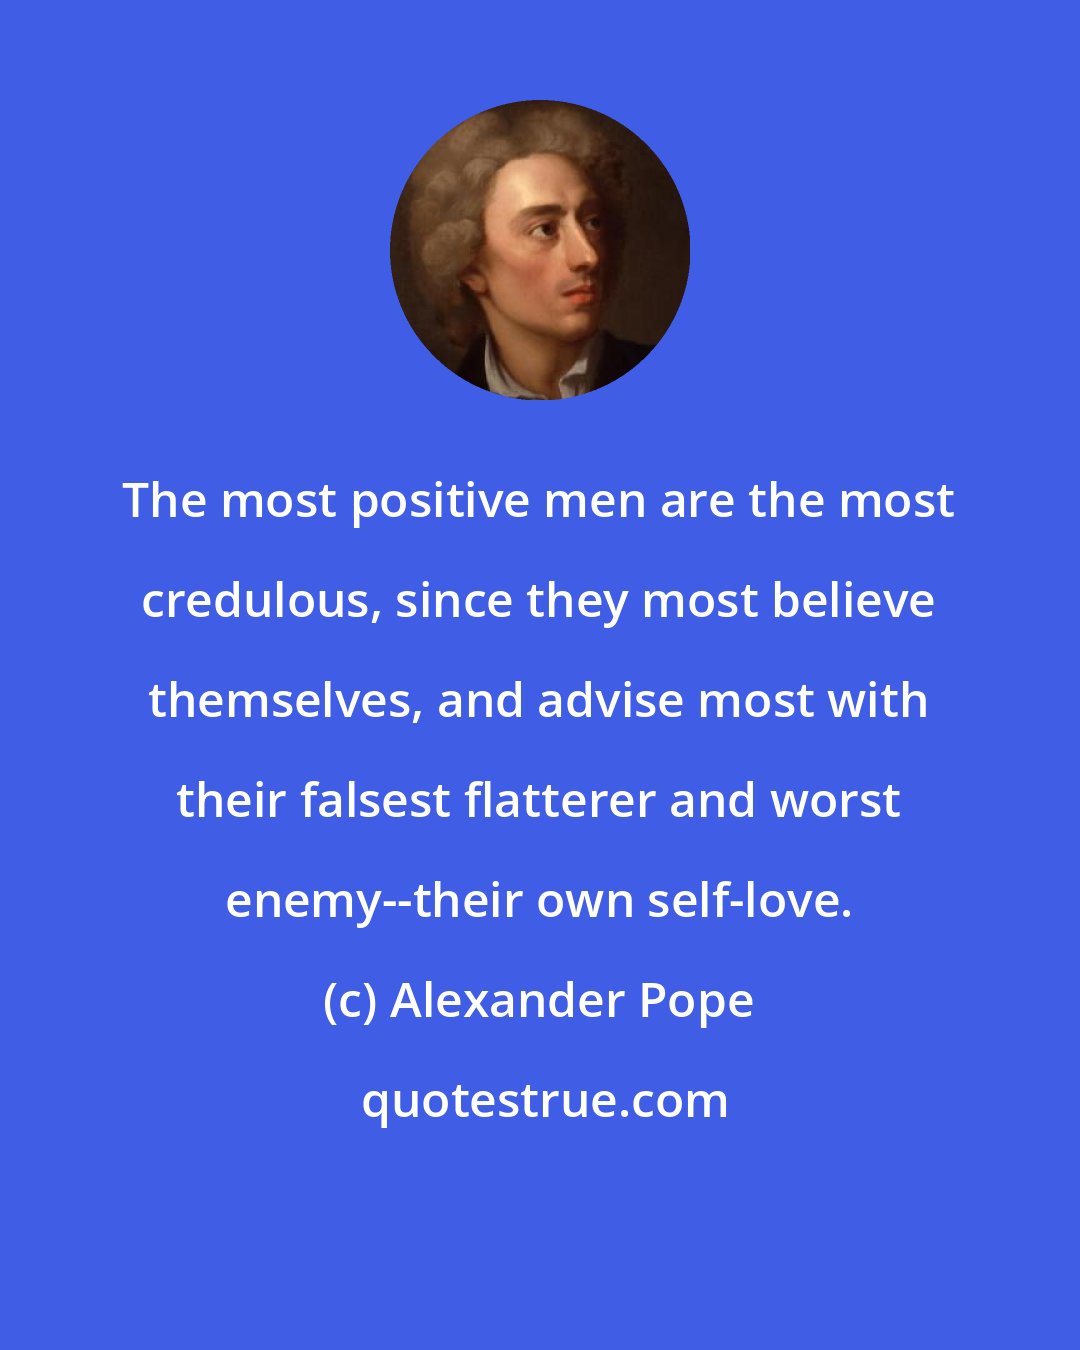 Alexander Pope: The most positive men are the most credulous, since they most believe themselves, and advise most with their falsest flatterer and worst enemy--their own self-love.